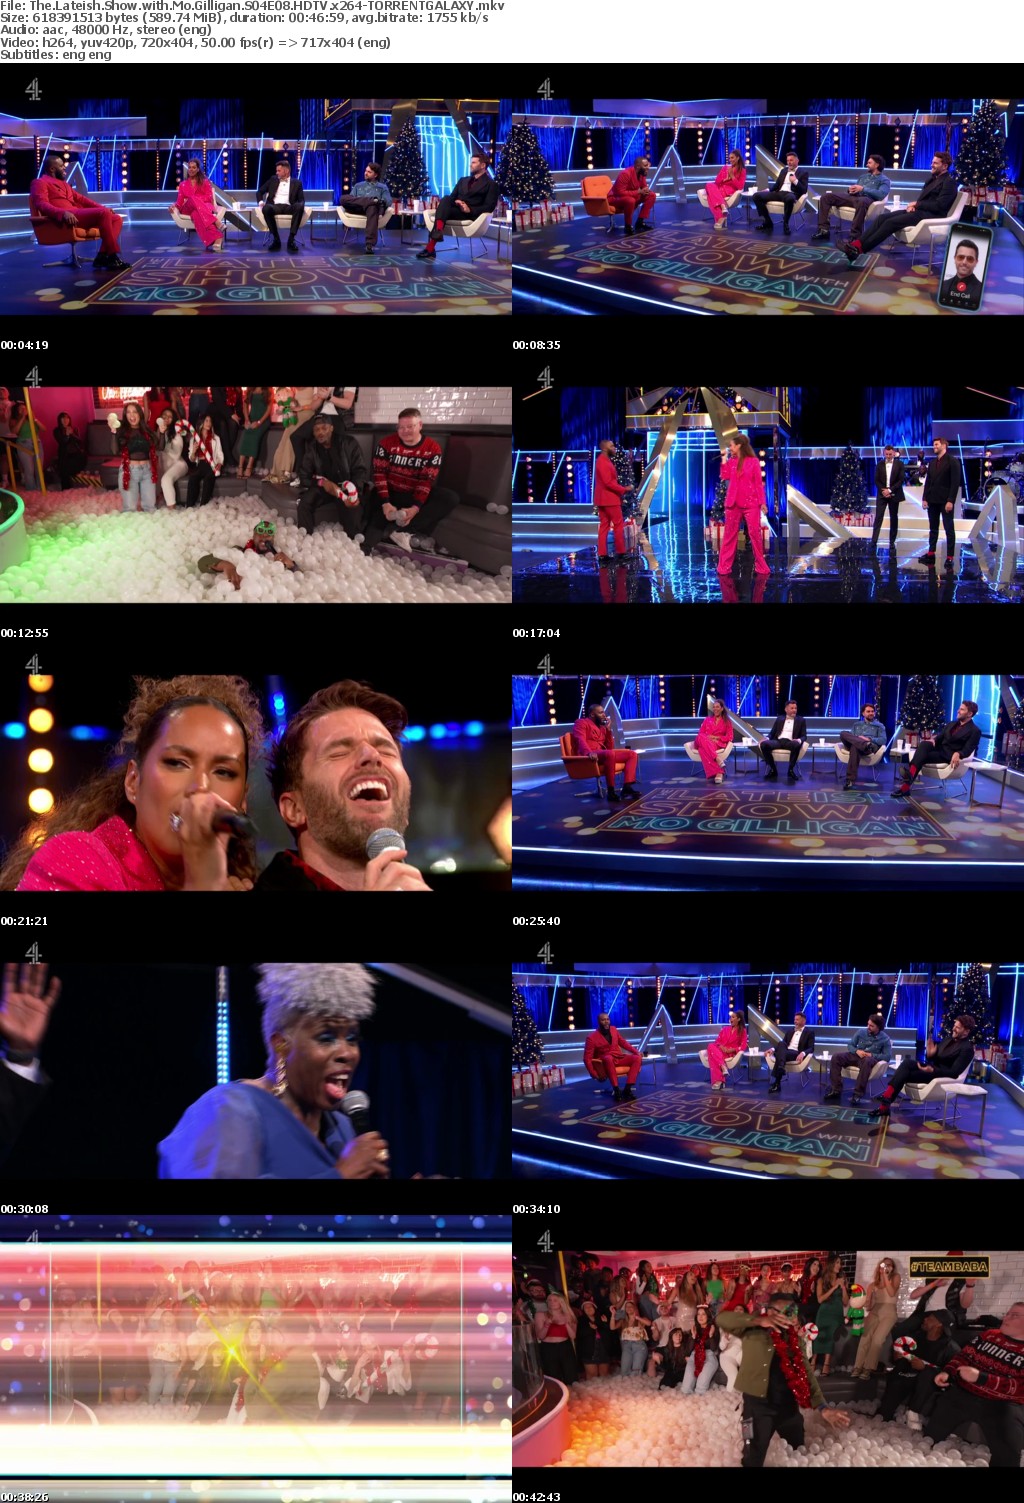 The Lateish Show with Mo Gilligan S04E08 HDTV x264-GALAXY